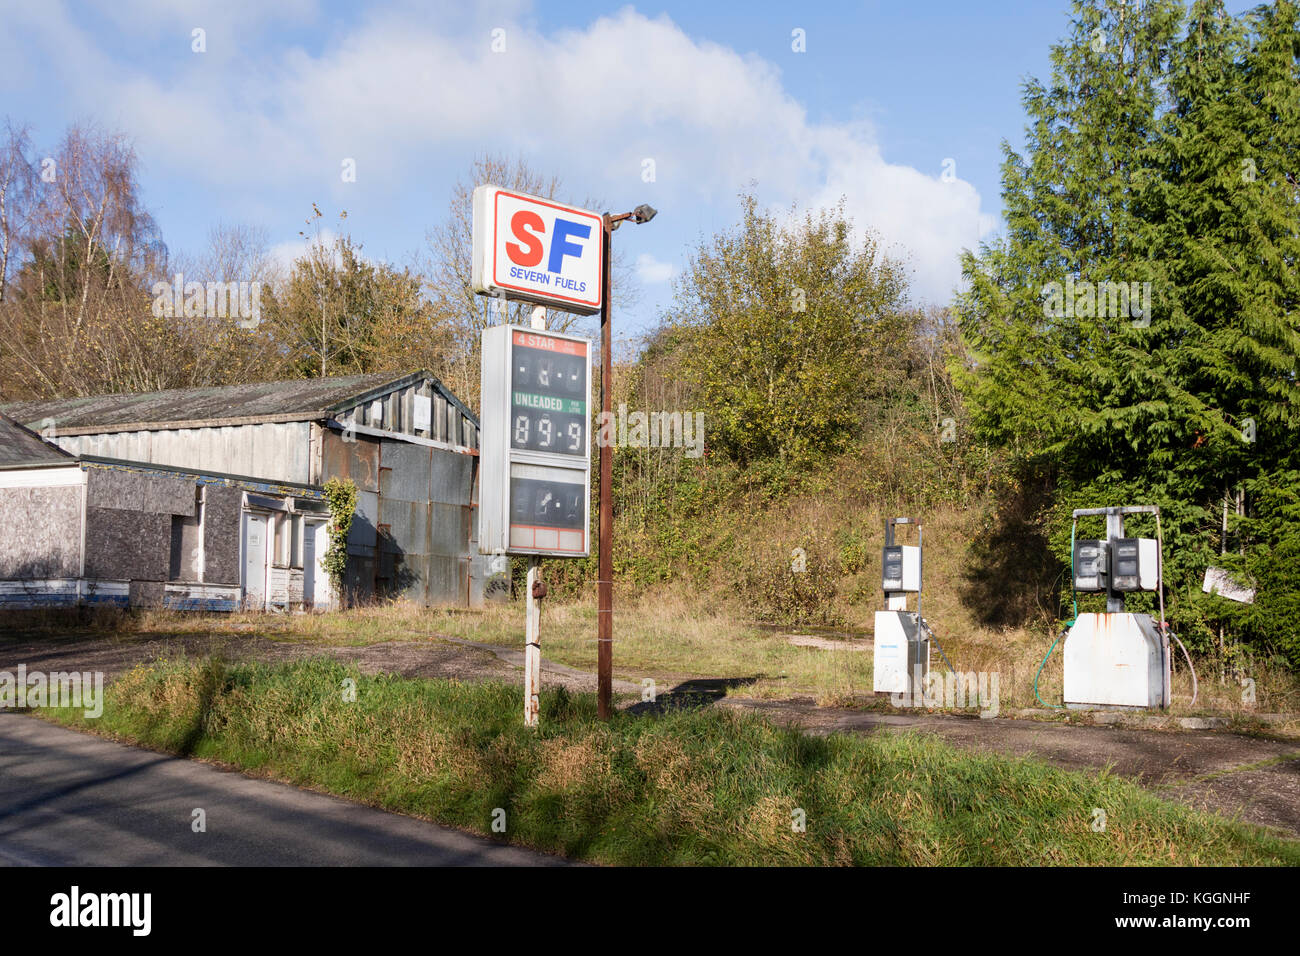 Closed down fuel station. England, UK Stock Photo